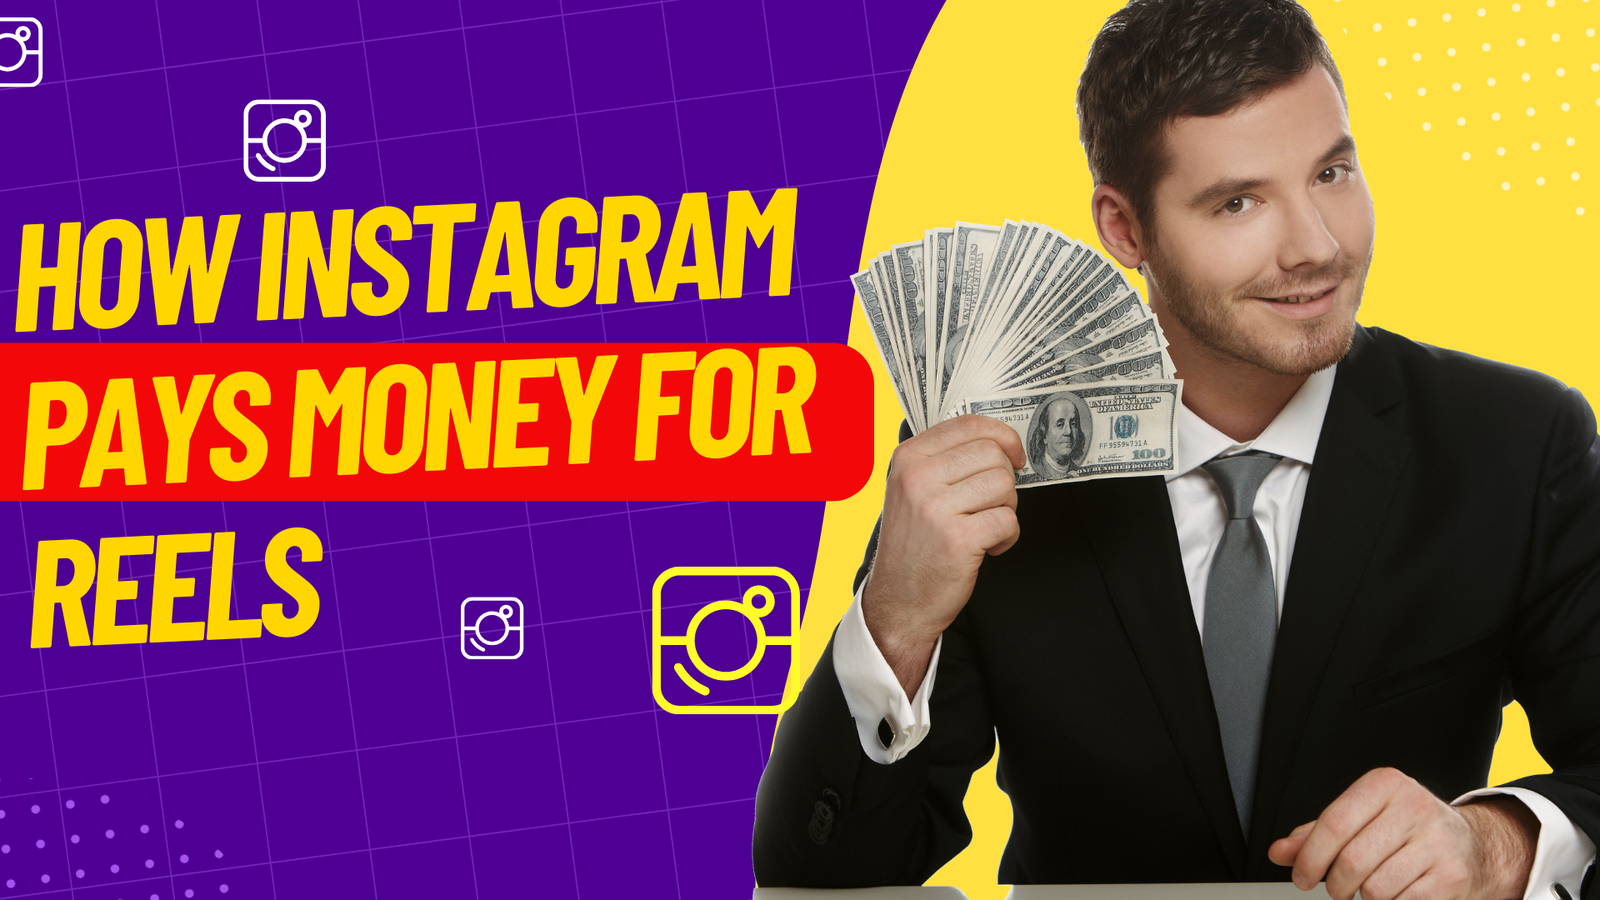 How Instagram Pays Money for Reels